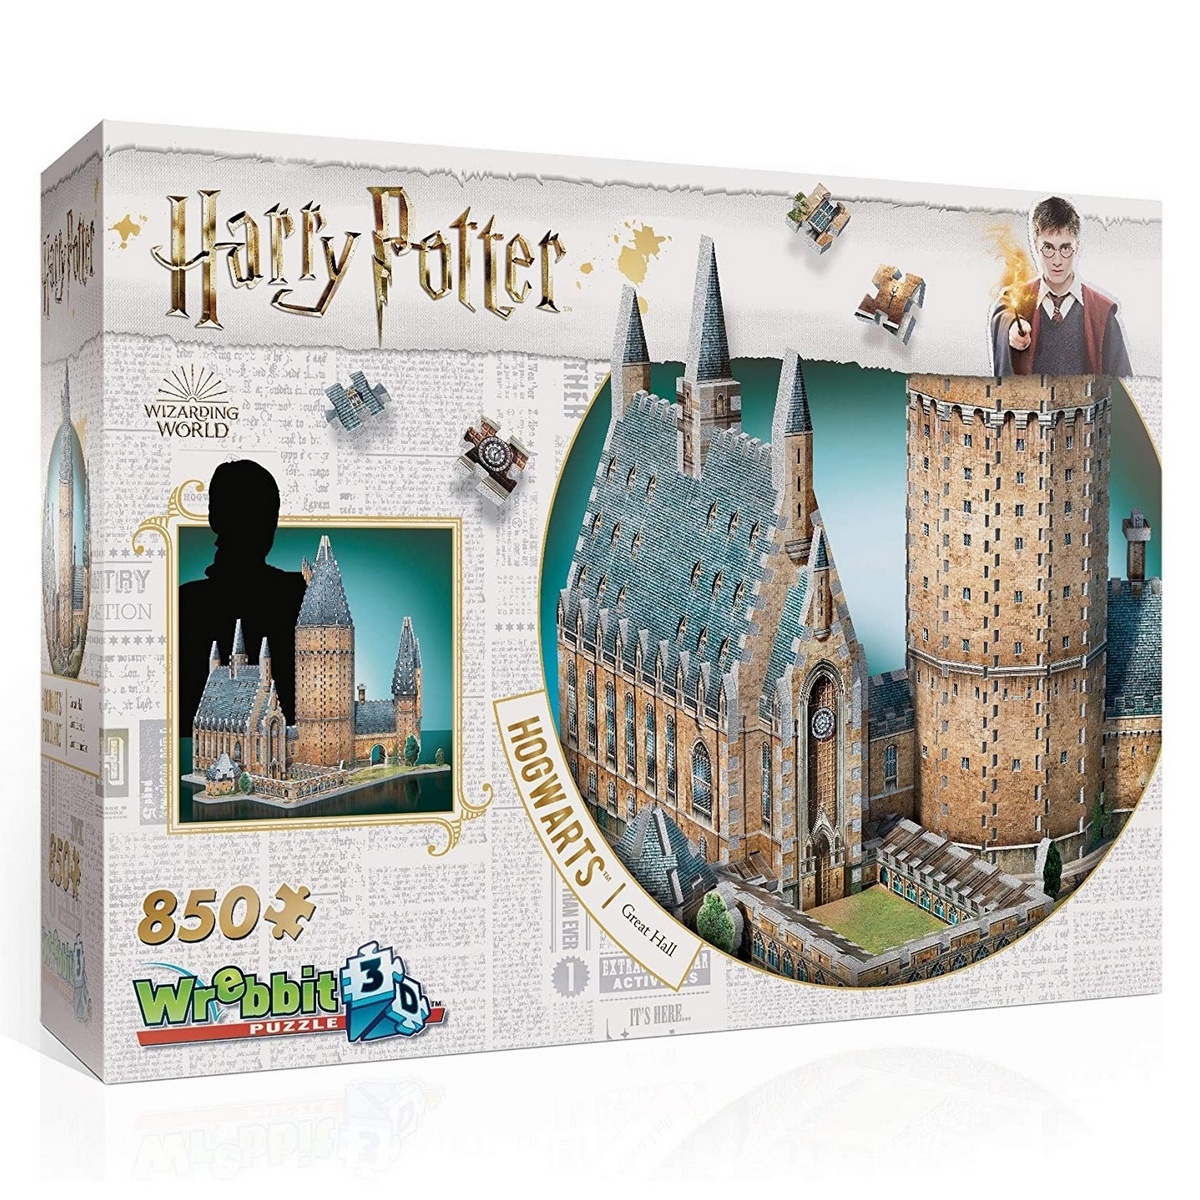 Harry Potter - Hogwarts Great Hall 3D Puzzle, 850 Pieces